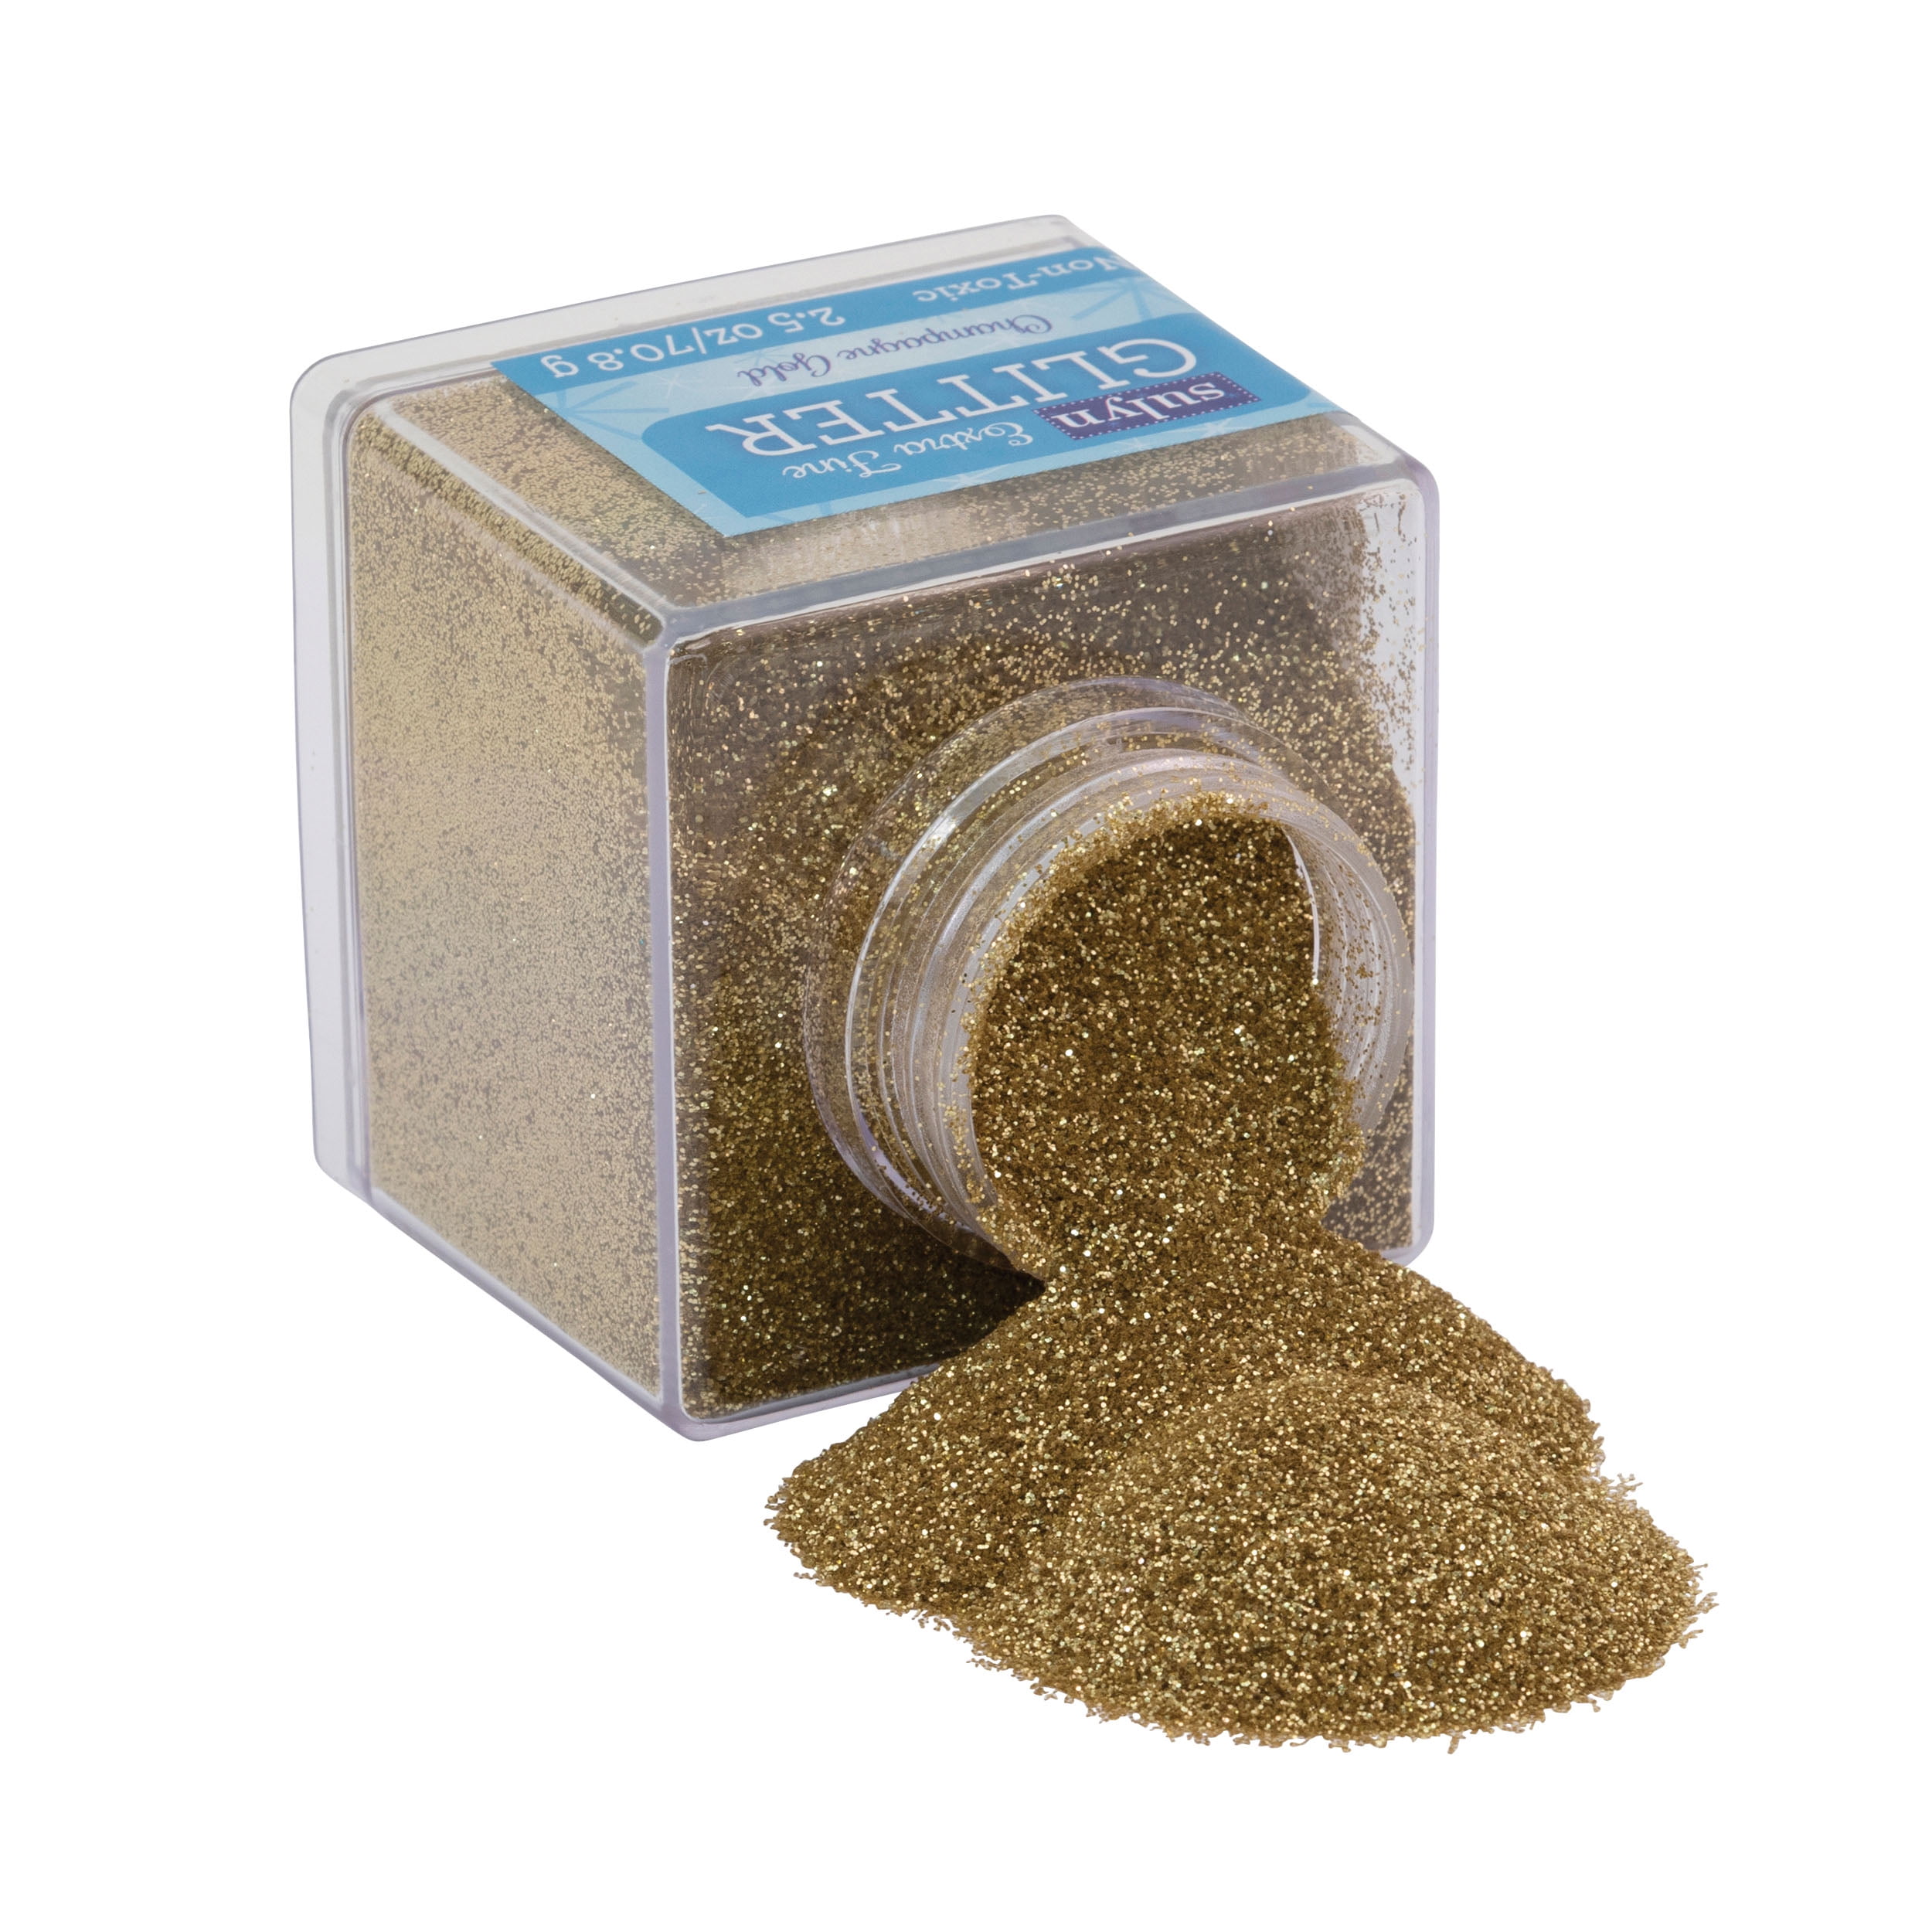 Sulyn Gold Glitter, 4 oz - Pay Less Super Markets